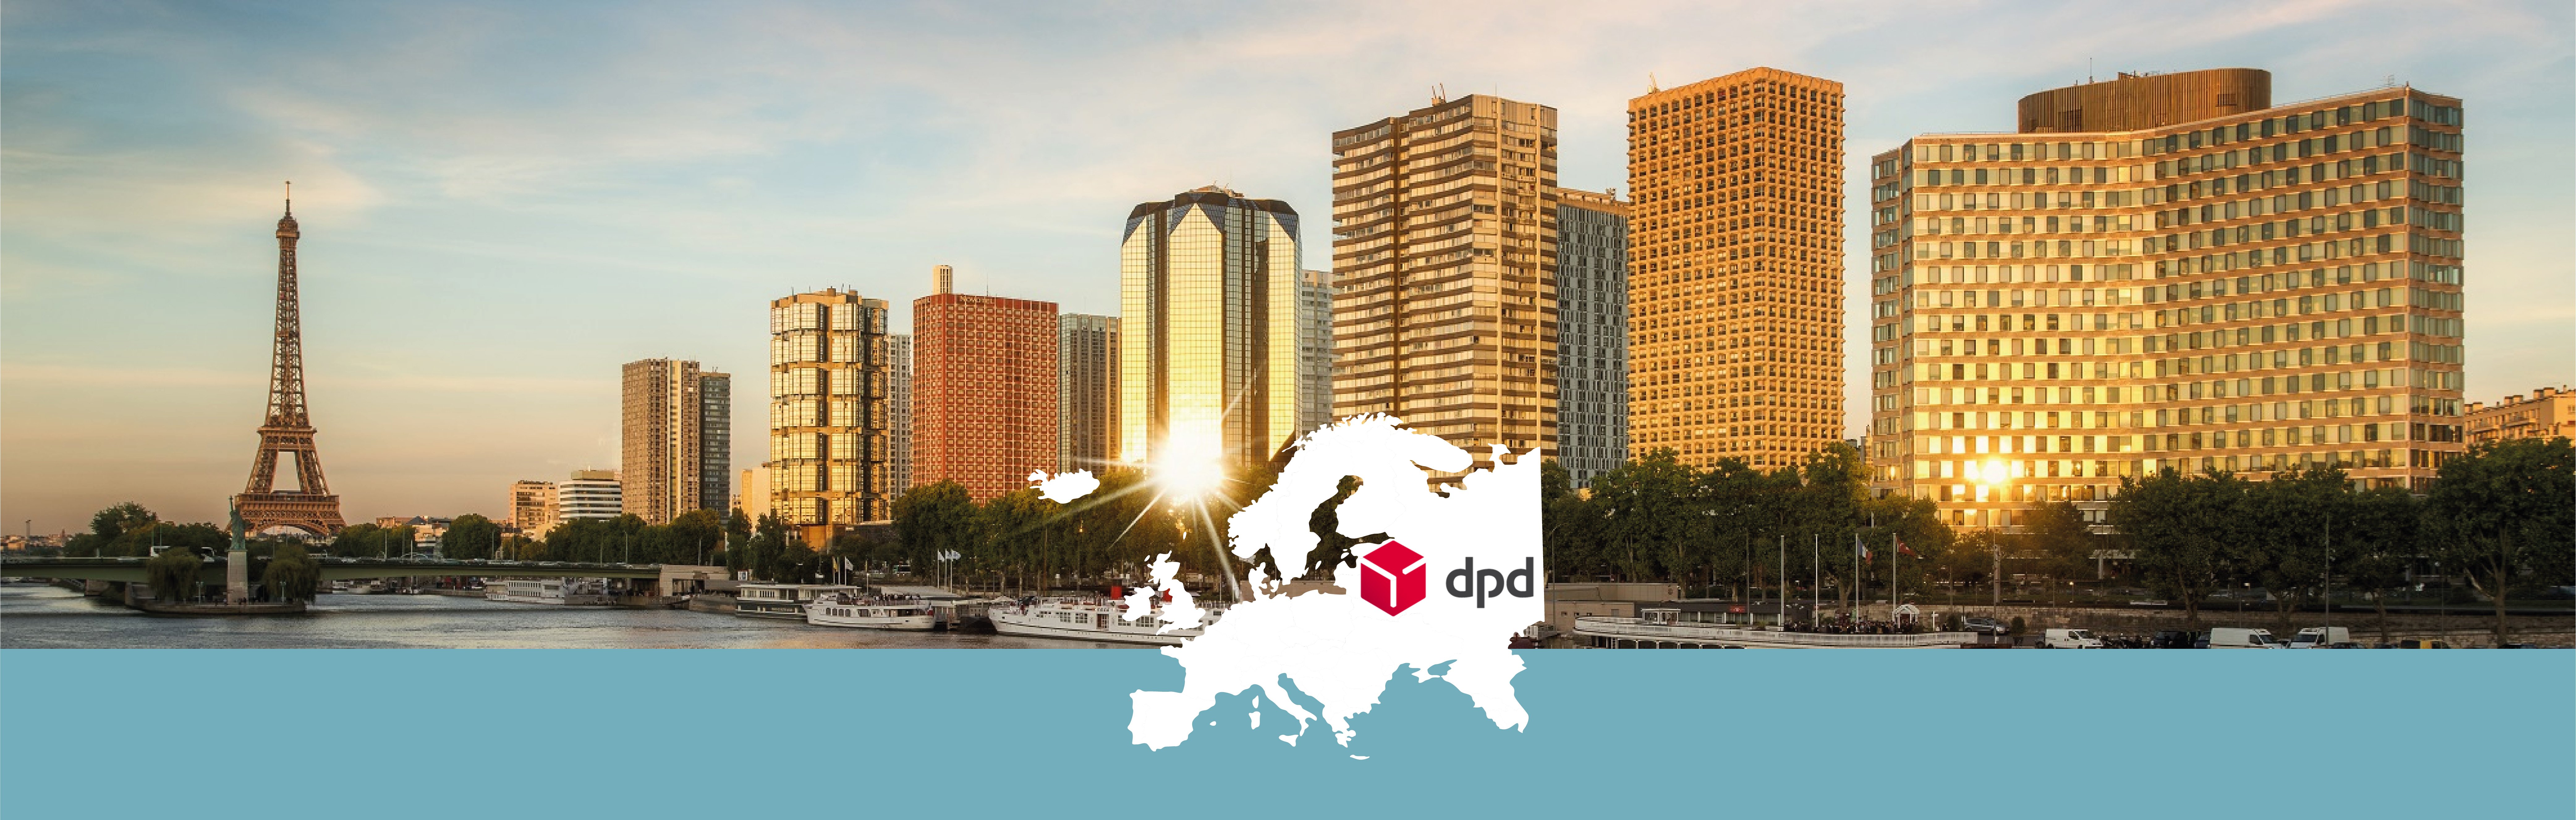 Asendia-_DPD-Europe-Delivery